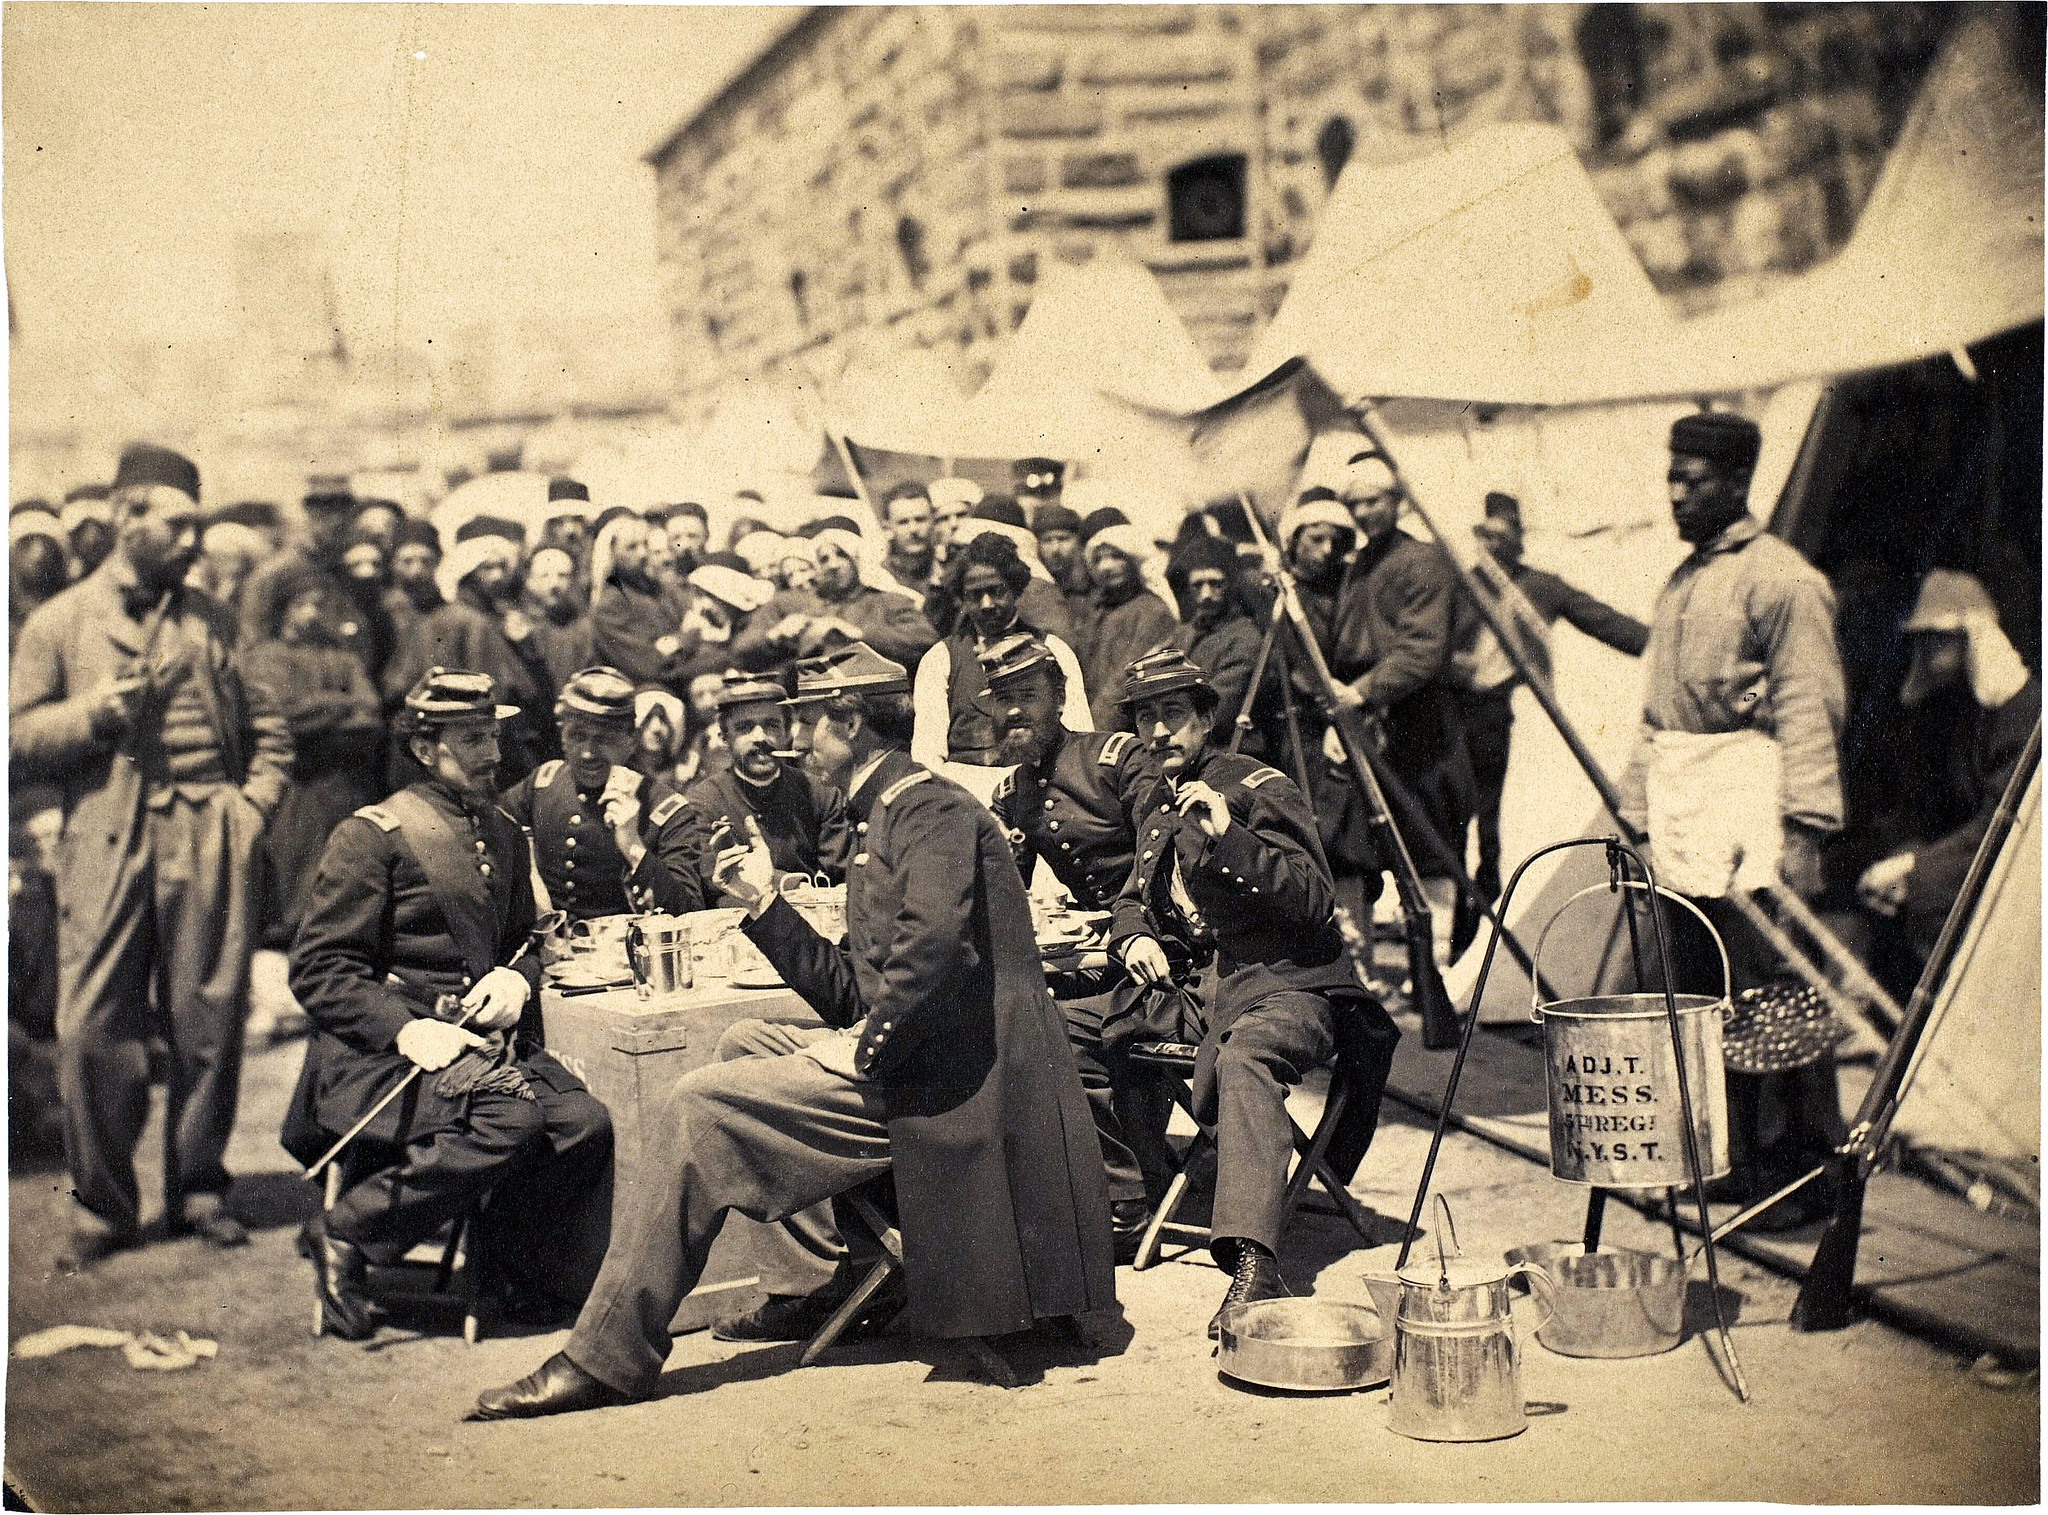 Duryea Zouaves, Fort Schuyler Adjuant Mess, May 18, 1861